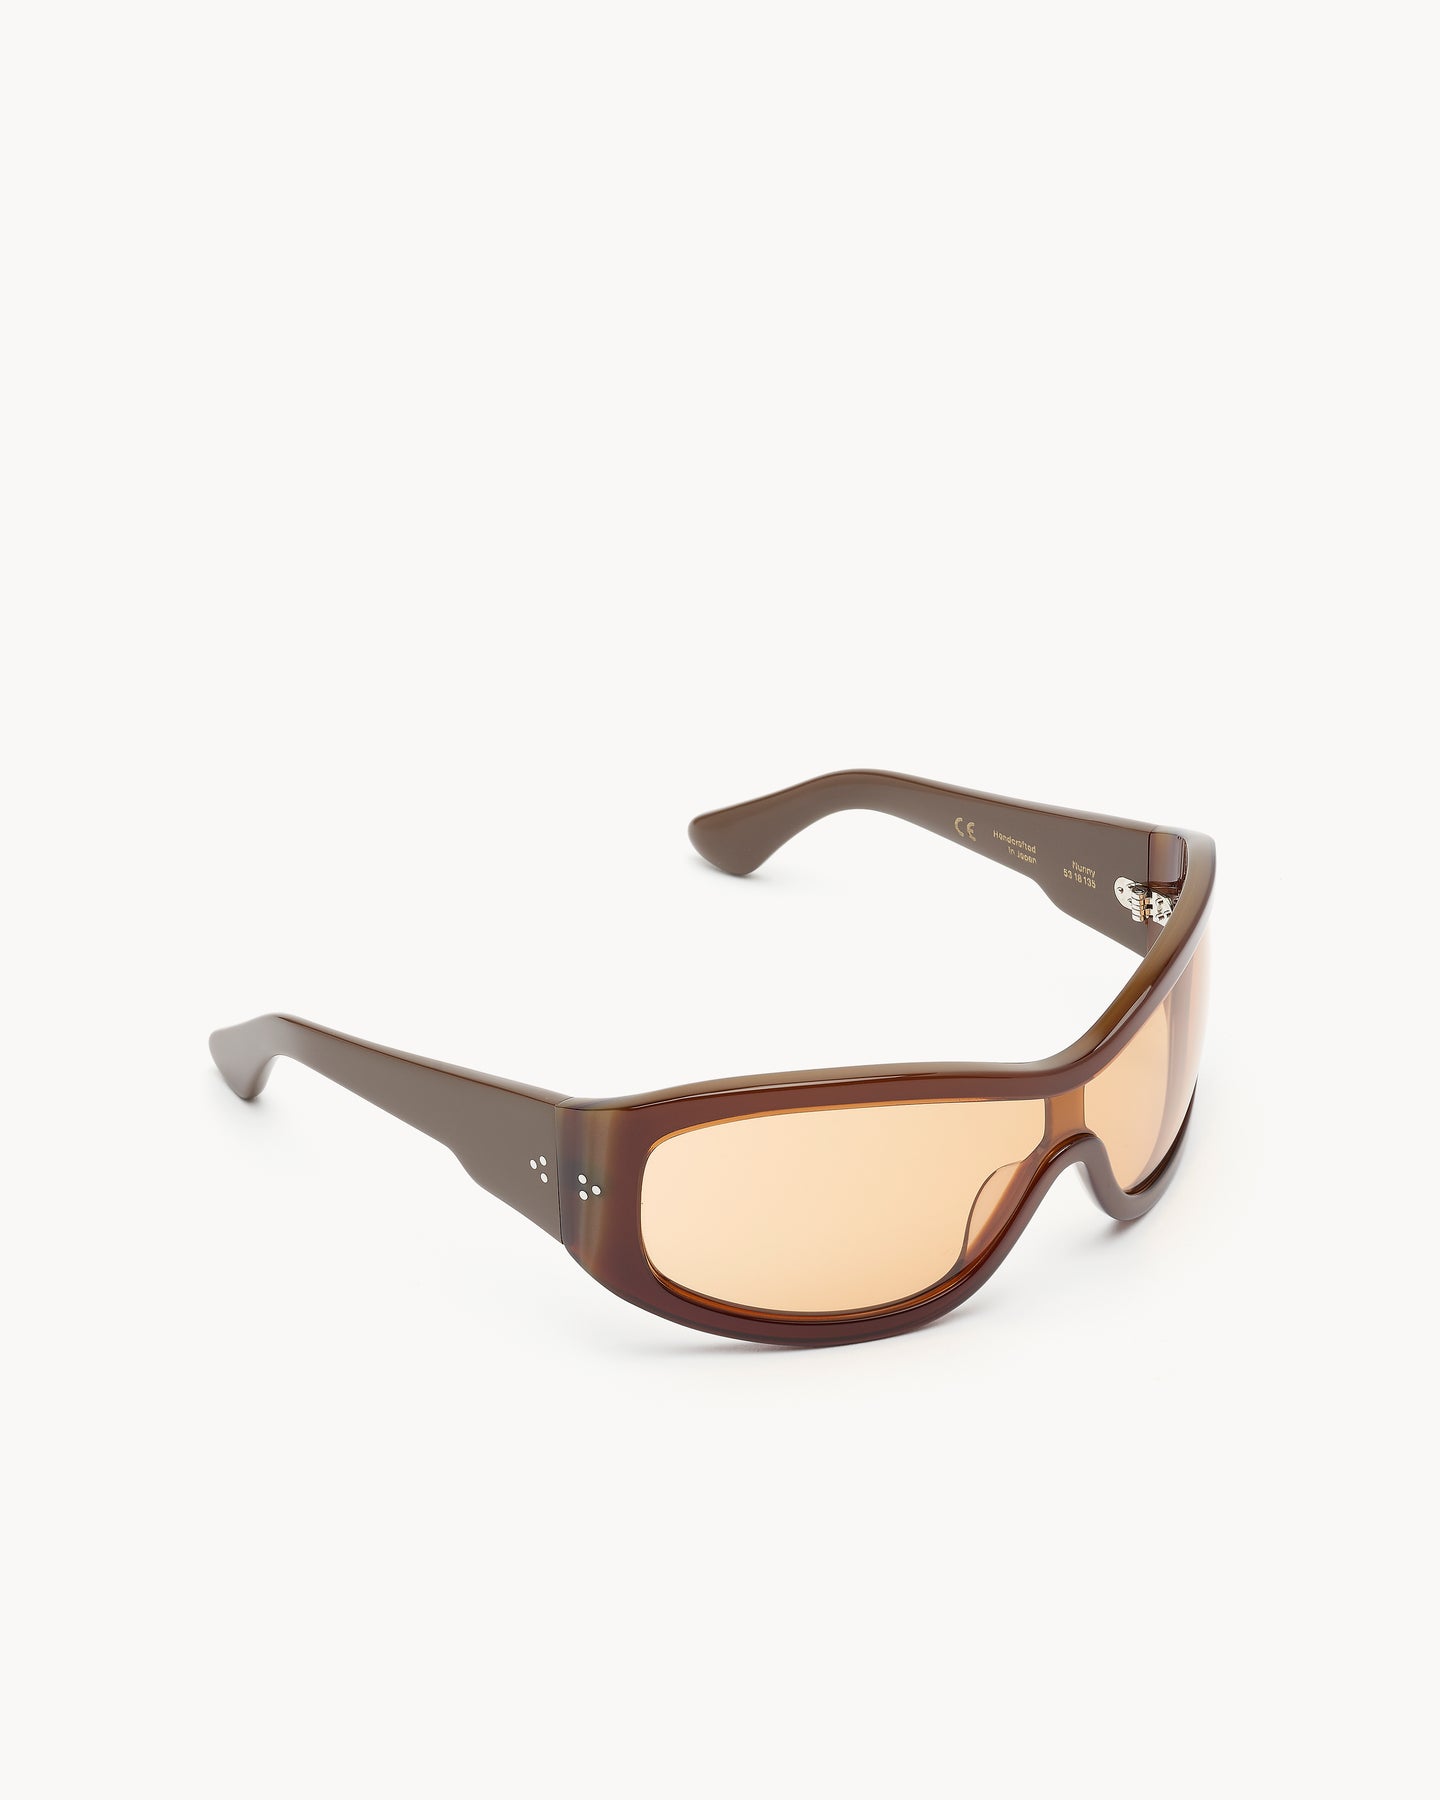 Port Tanger Nunny Sunglasses in Brown Acetate and Light Brown Lenses 2